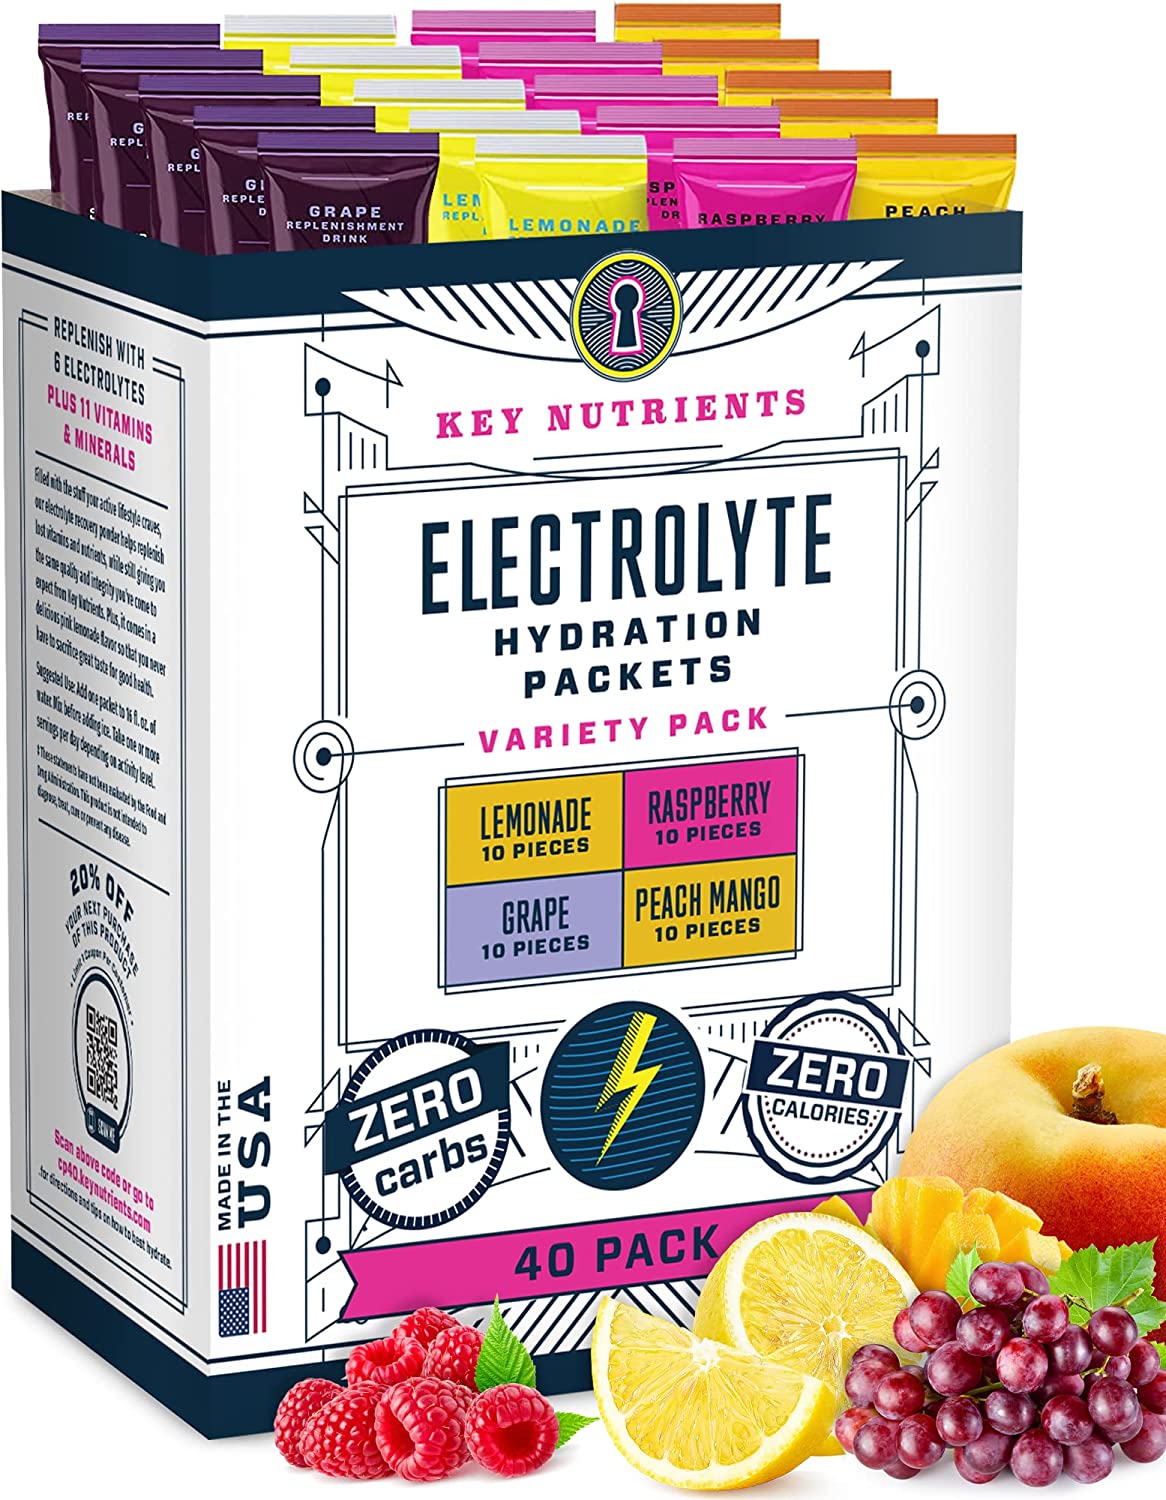 Electrolyte Recovery Plus - Travel Packets